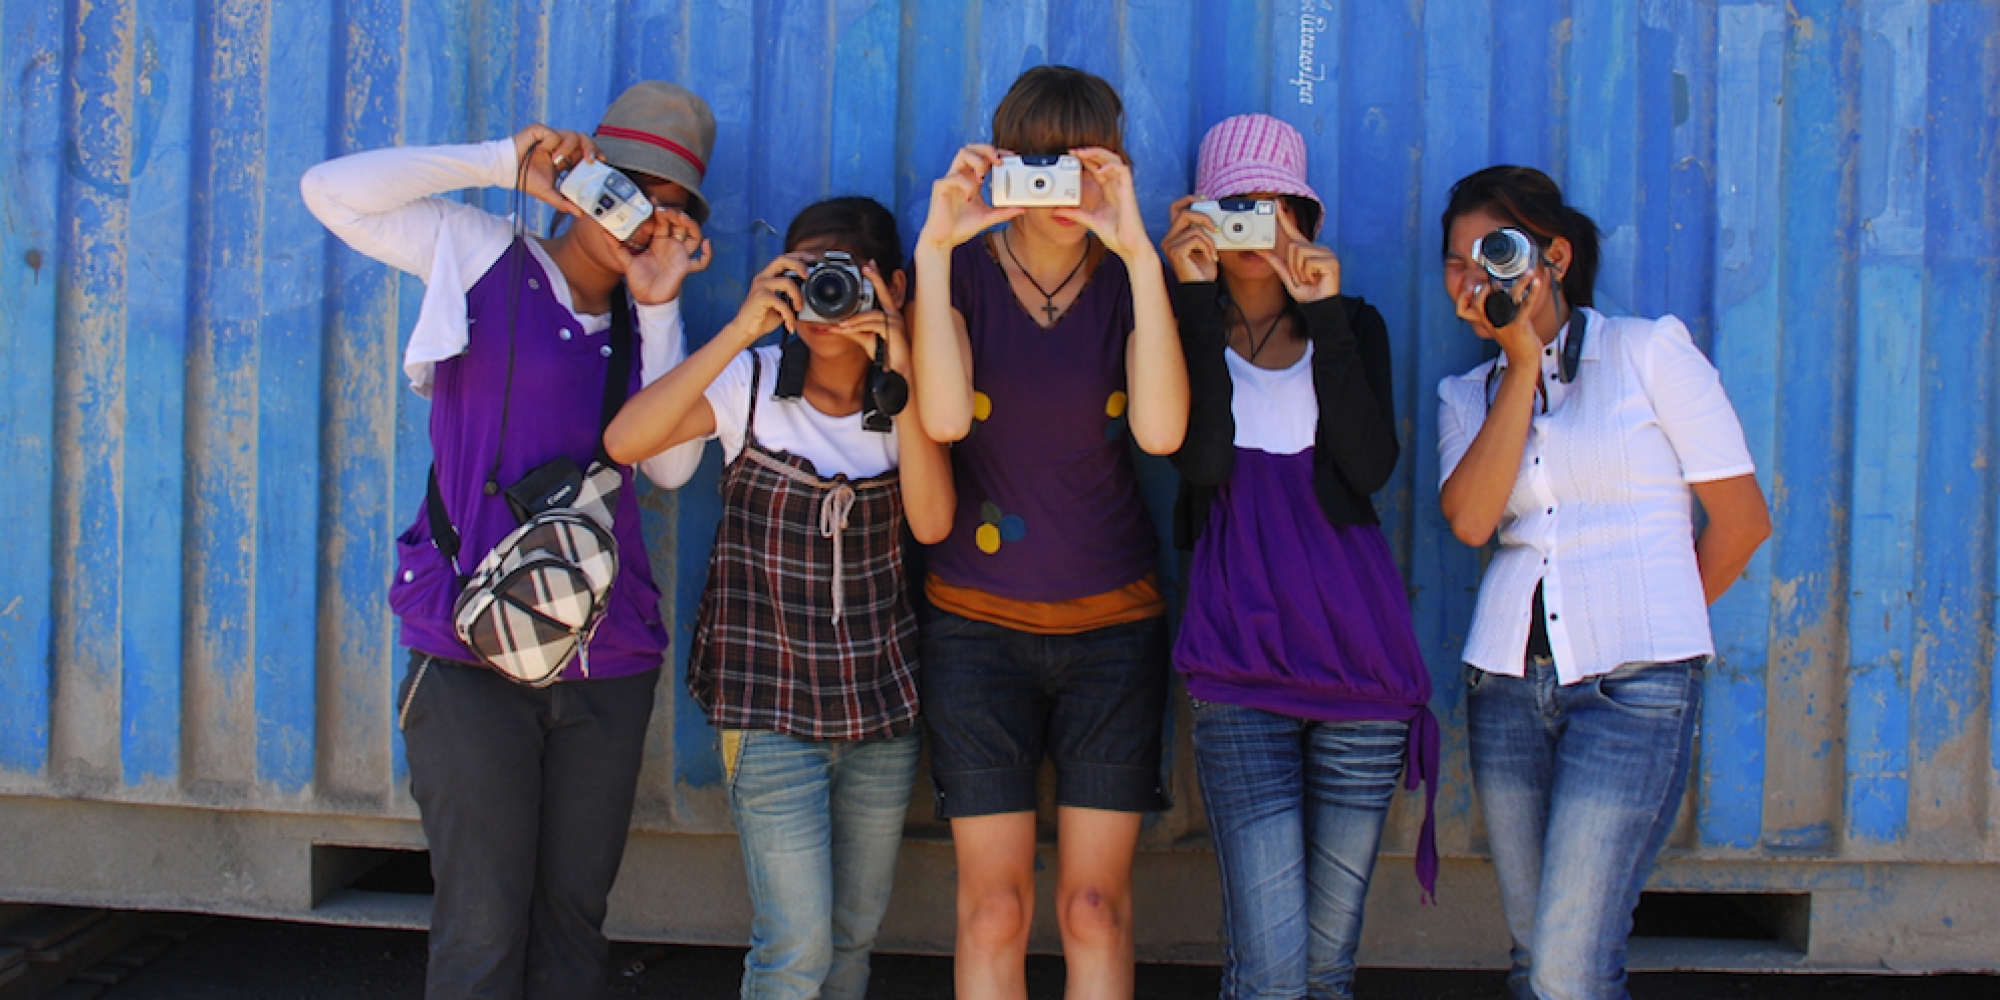 In Cambodia, Jaymie Friesen coordinated a therapeutic photography course for women exiting the sex trade.